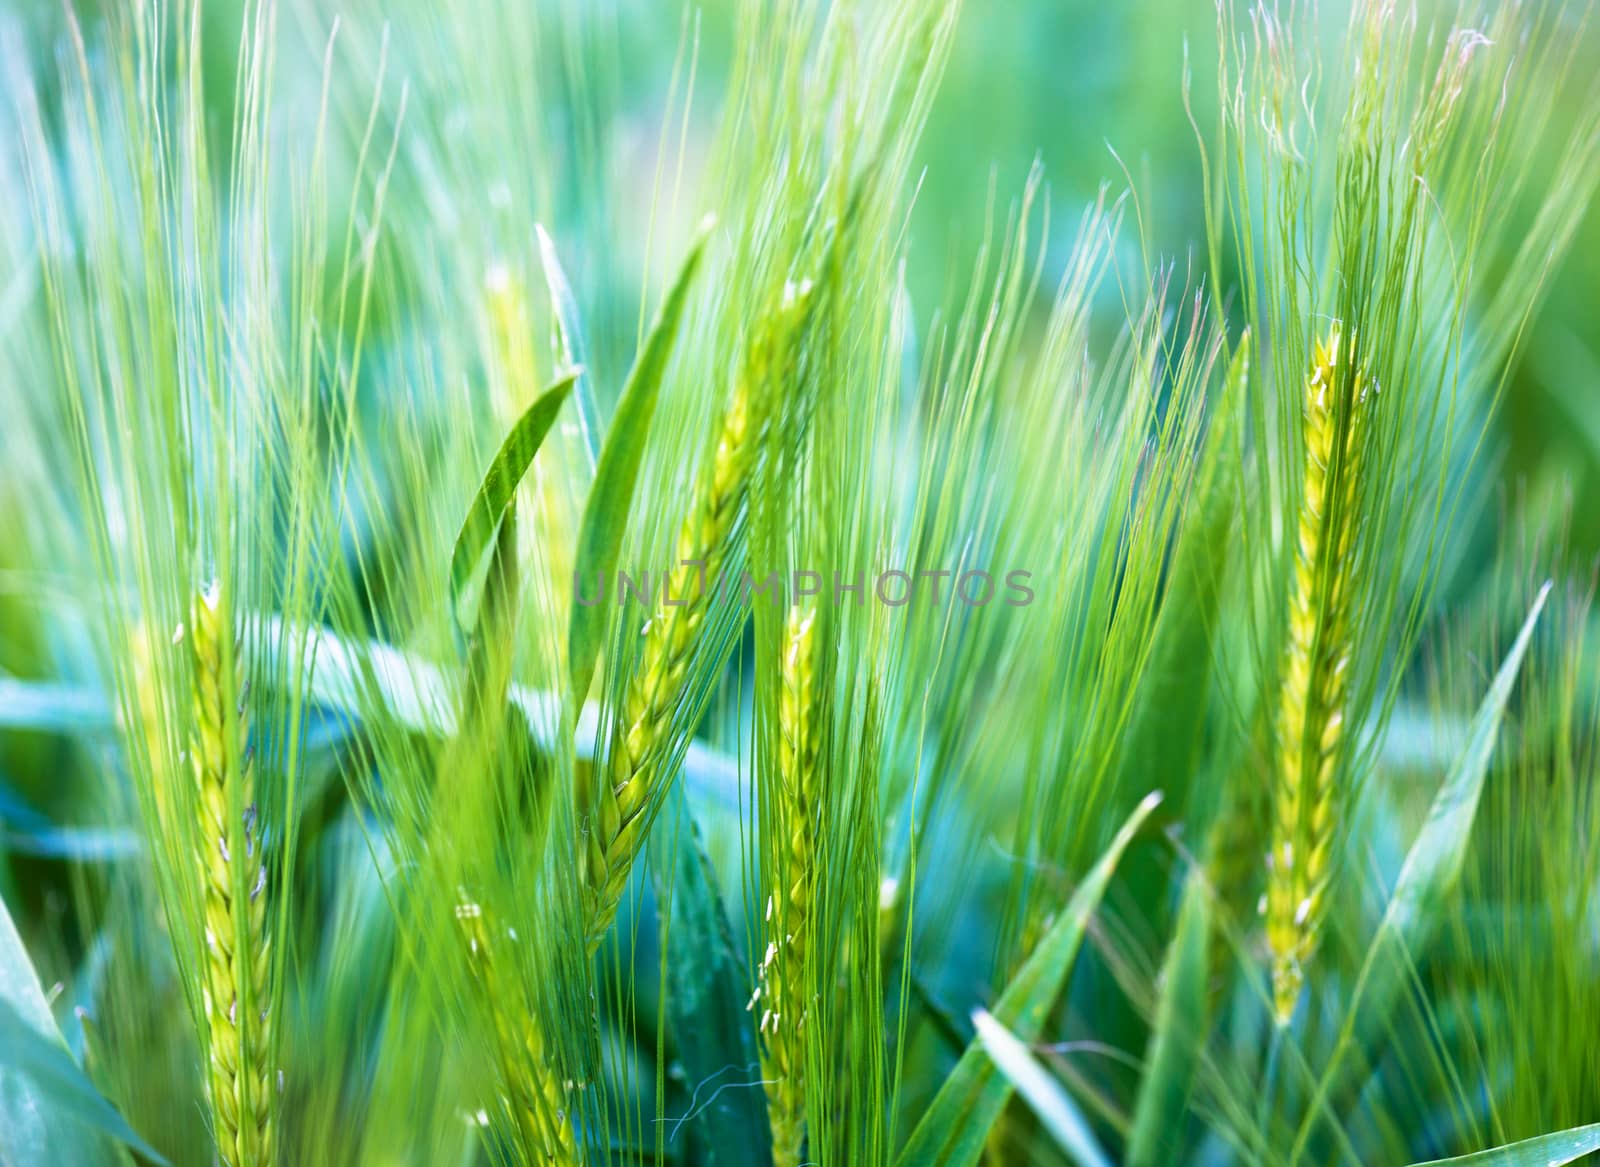 Ear of wheat - soft background by aa-w